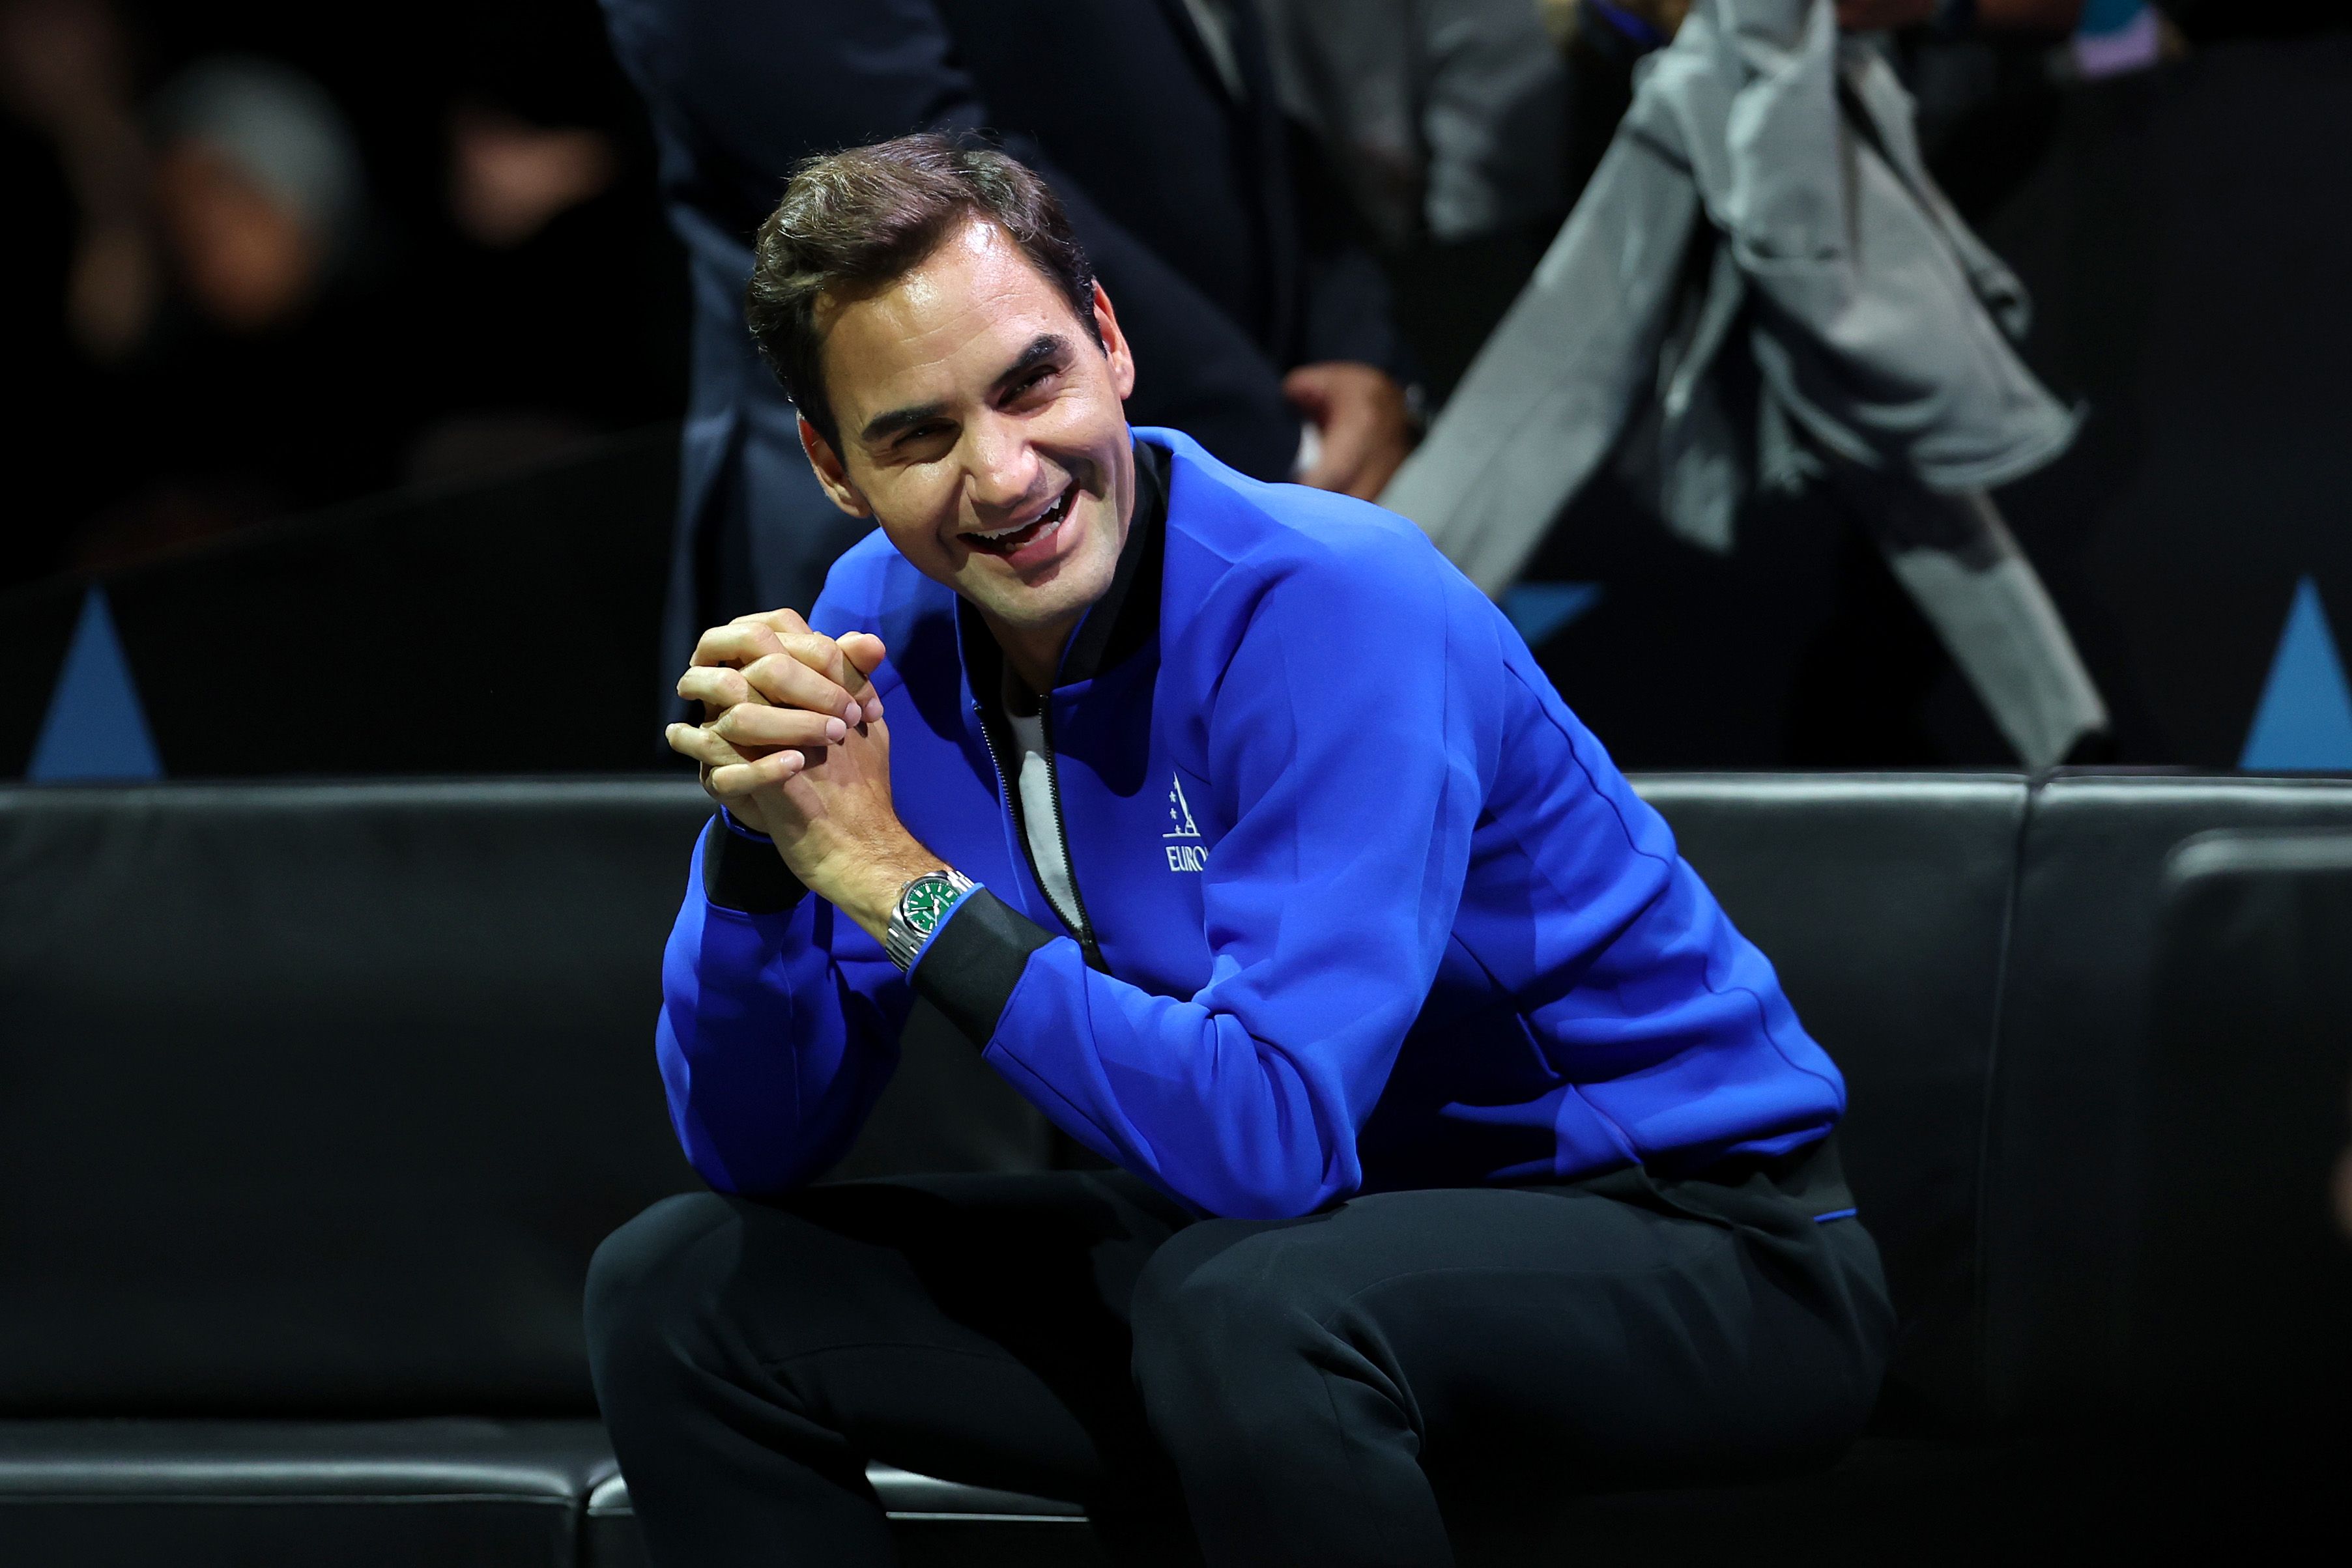 Roger Federer has a laugh at the Laver Cup